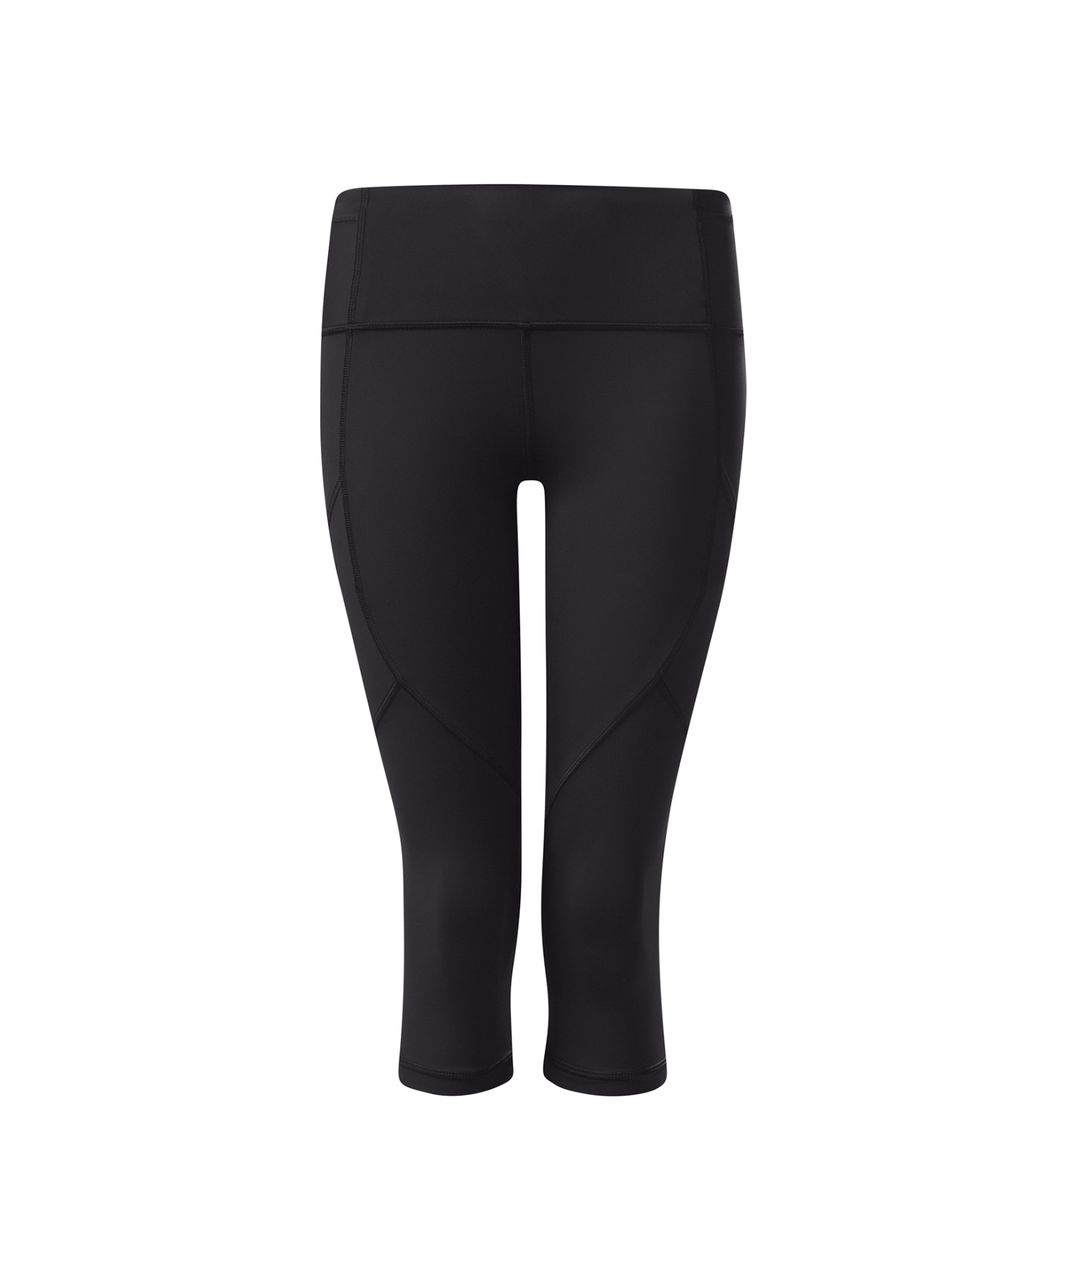 Lululemon Outrun 17” Crop Ruched Back Leggings Black Luxtreme Size 12 - $41  - From Krystle